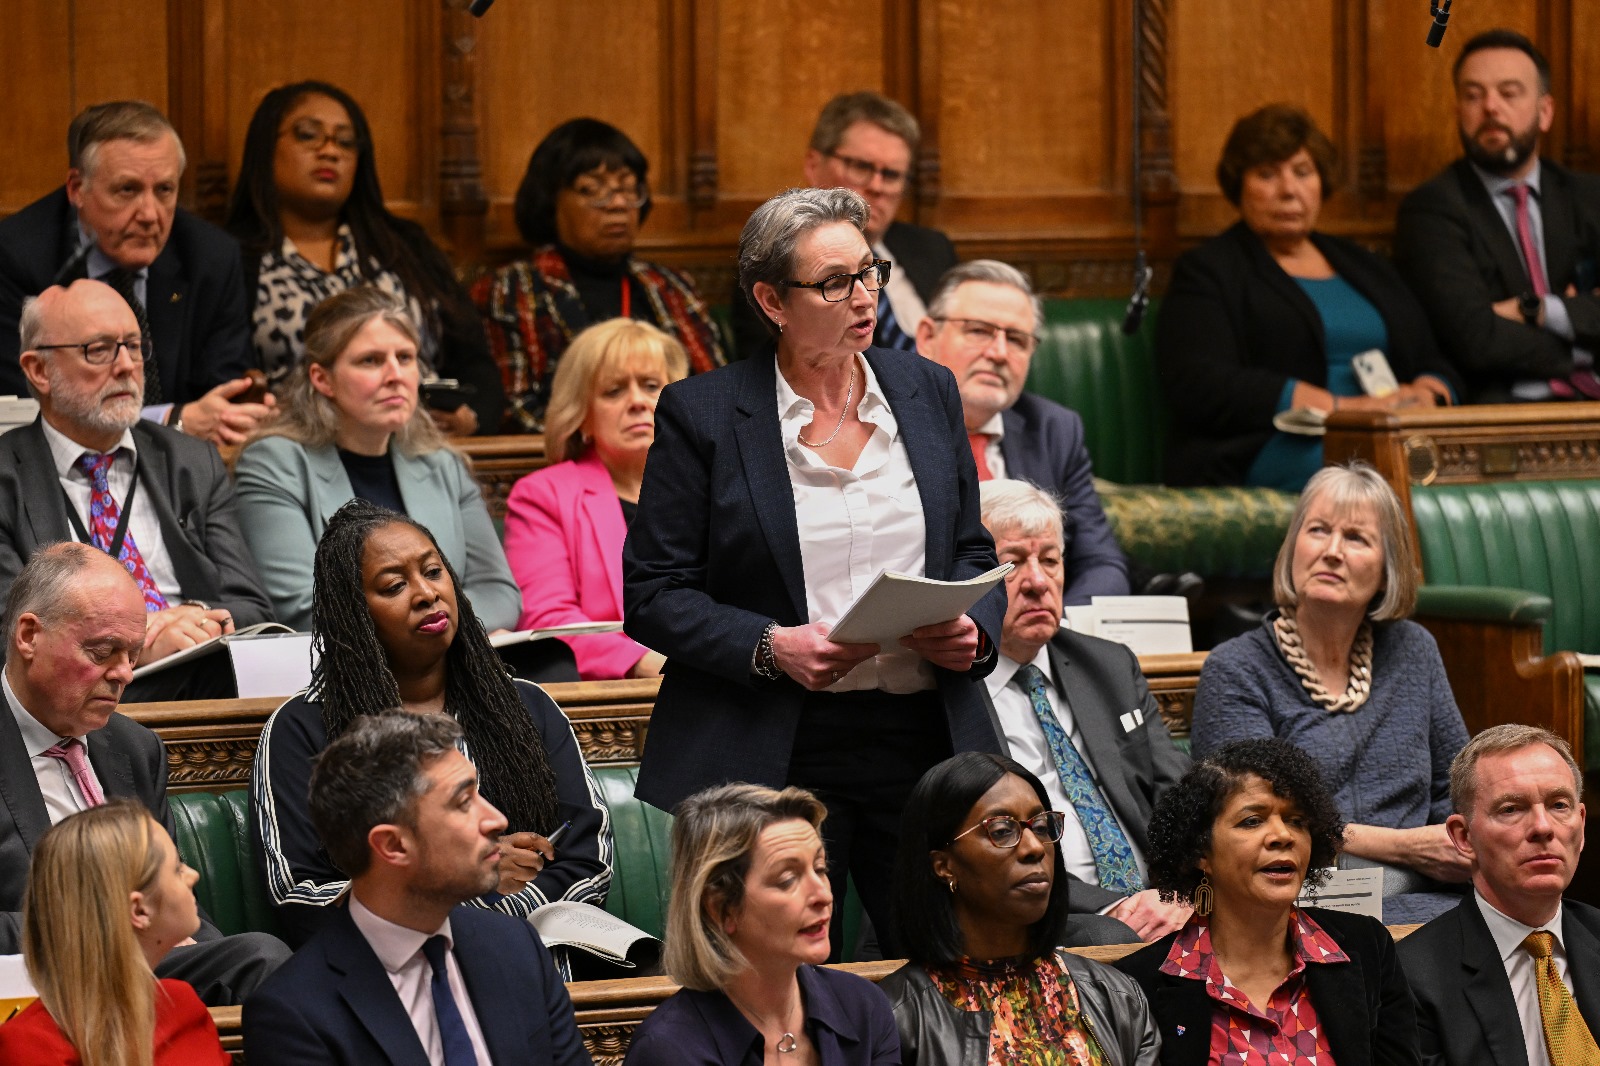 Kate Osborne MP slams Deputy Prime Minister and Tory Government for lack of action on IVF despite their promises to abolish the ‘Gay Tax’